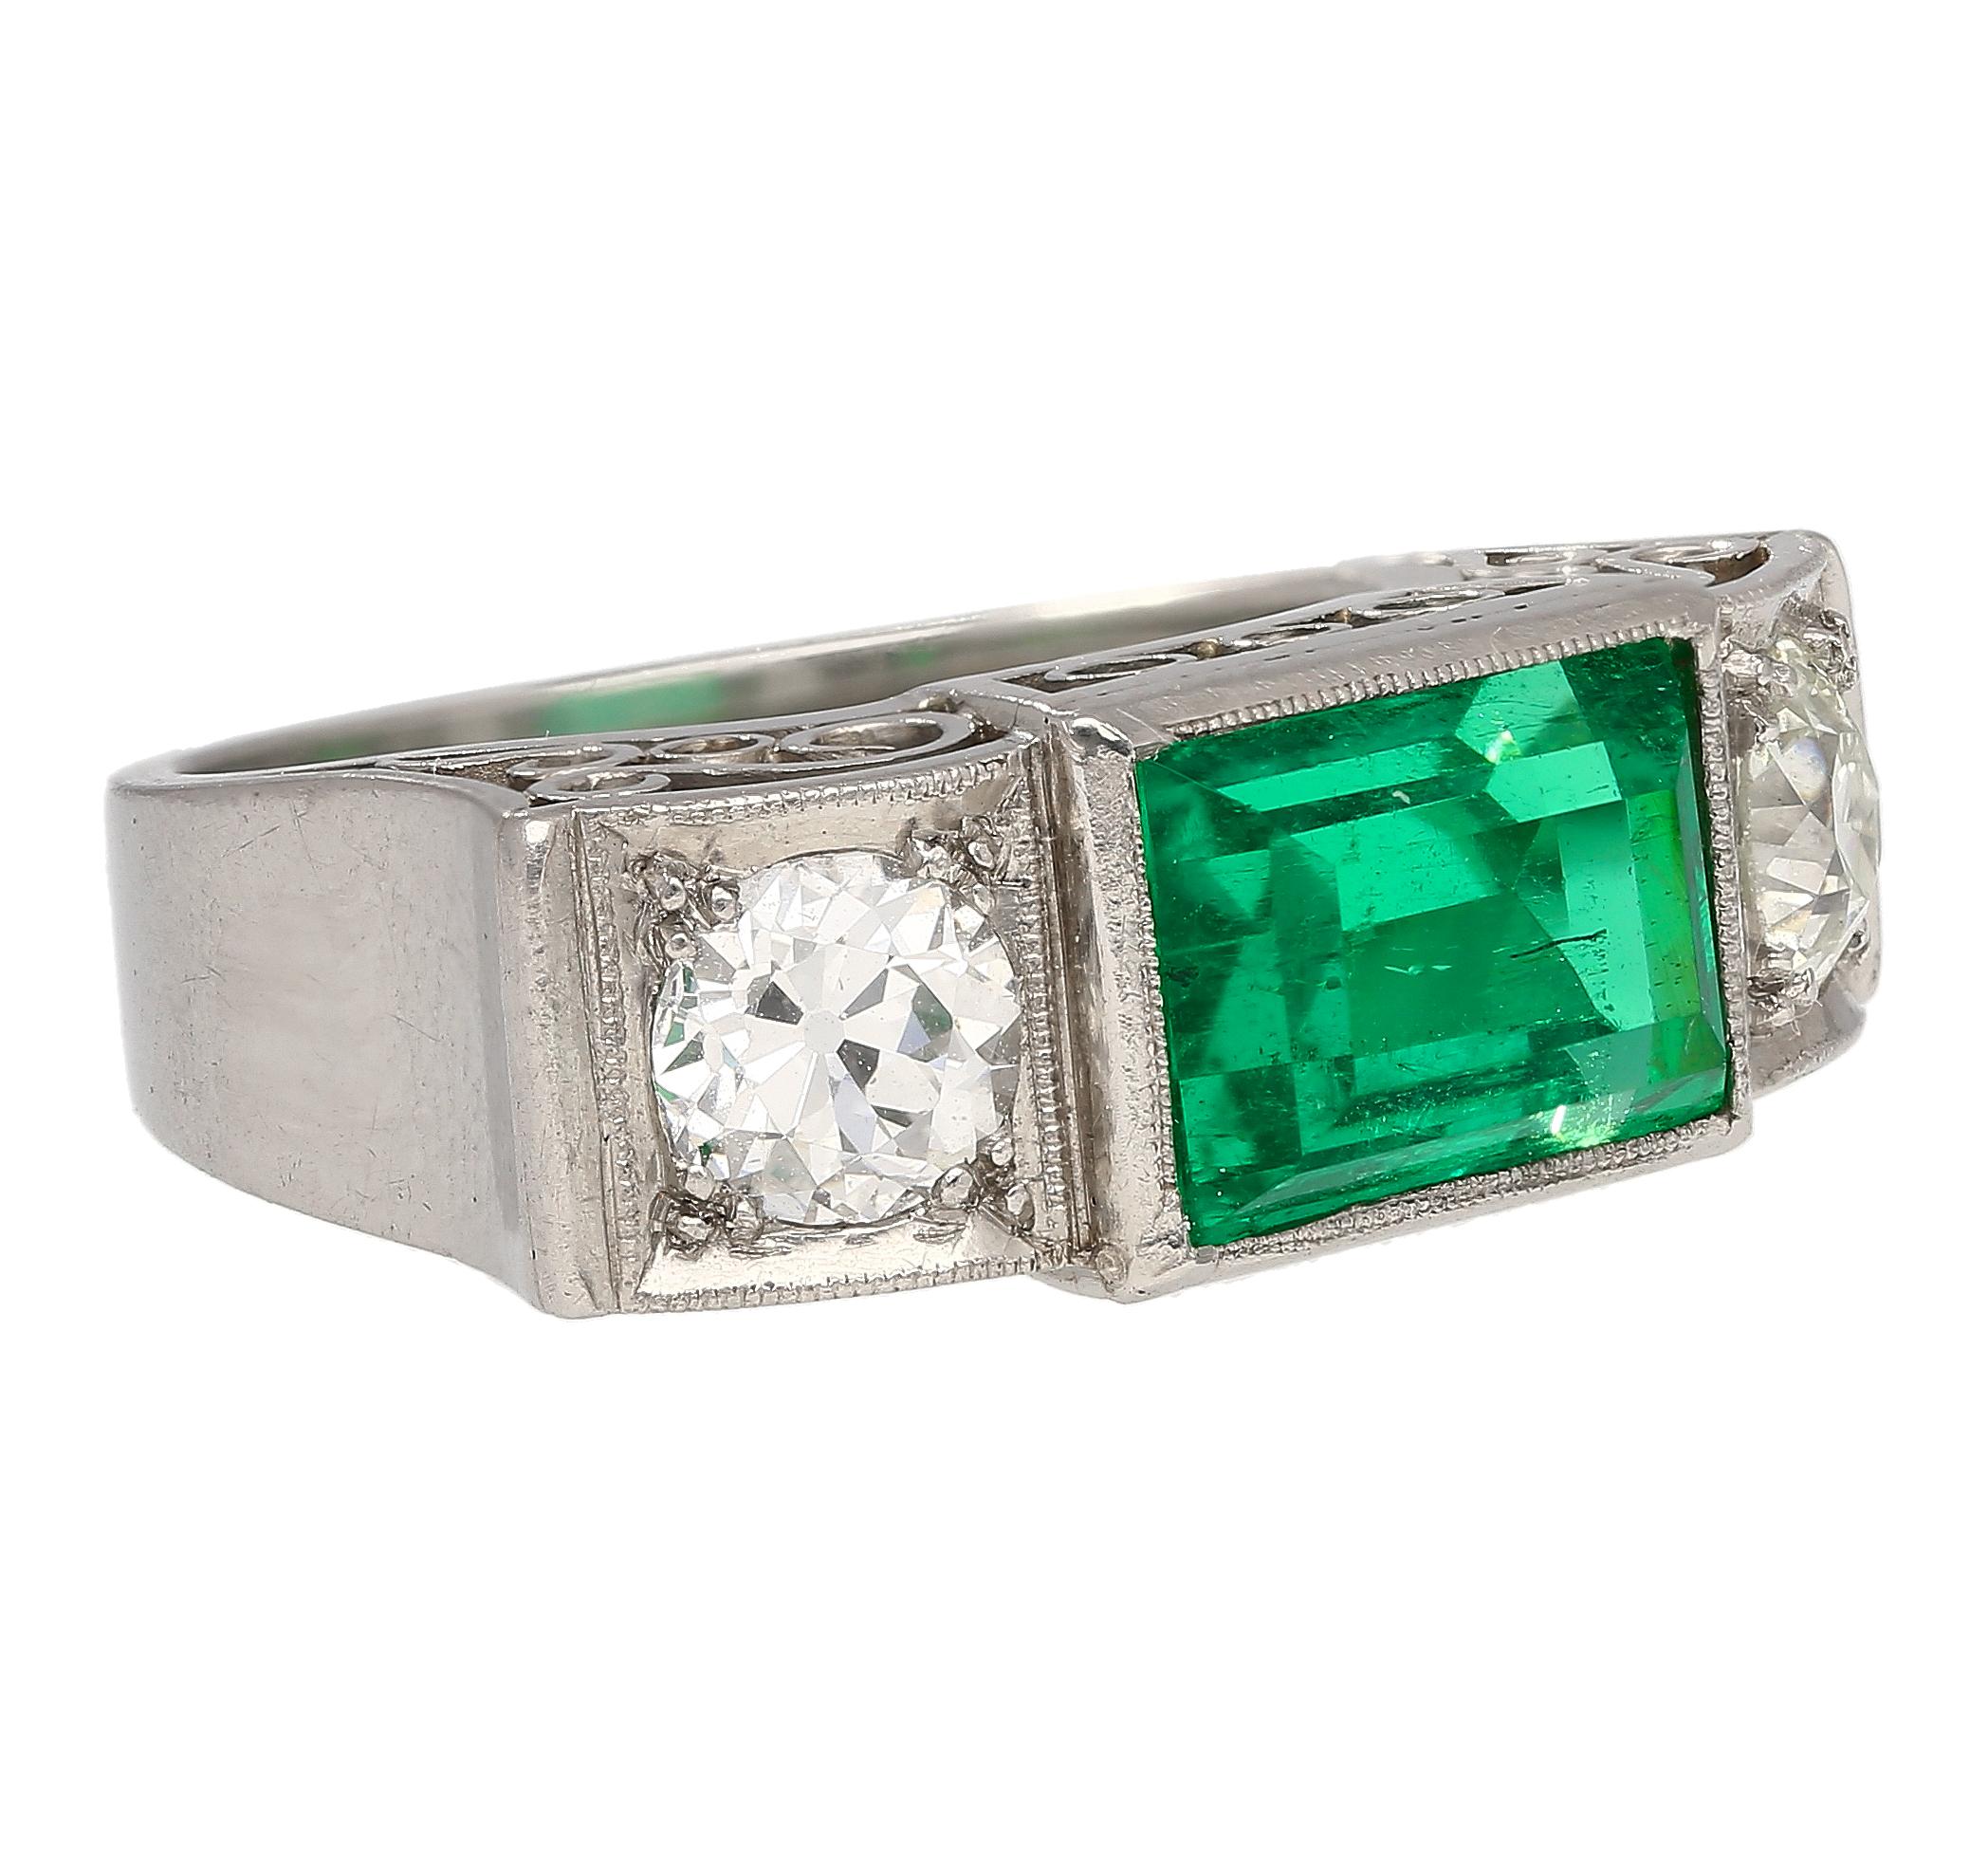 Retro GIA Certified 3.10 Carat Old Mine Muzo Colombian Emerald & Old Cut Diamond Ring For Sale